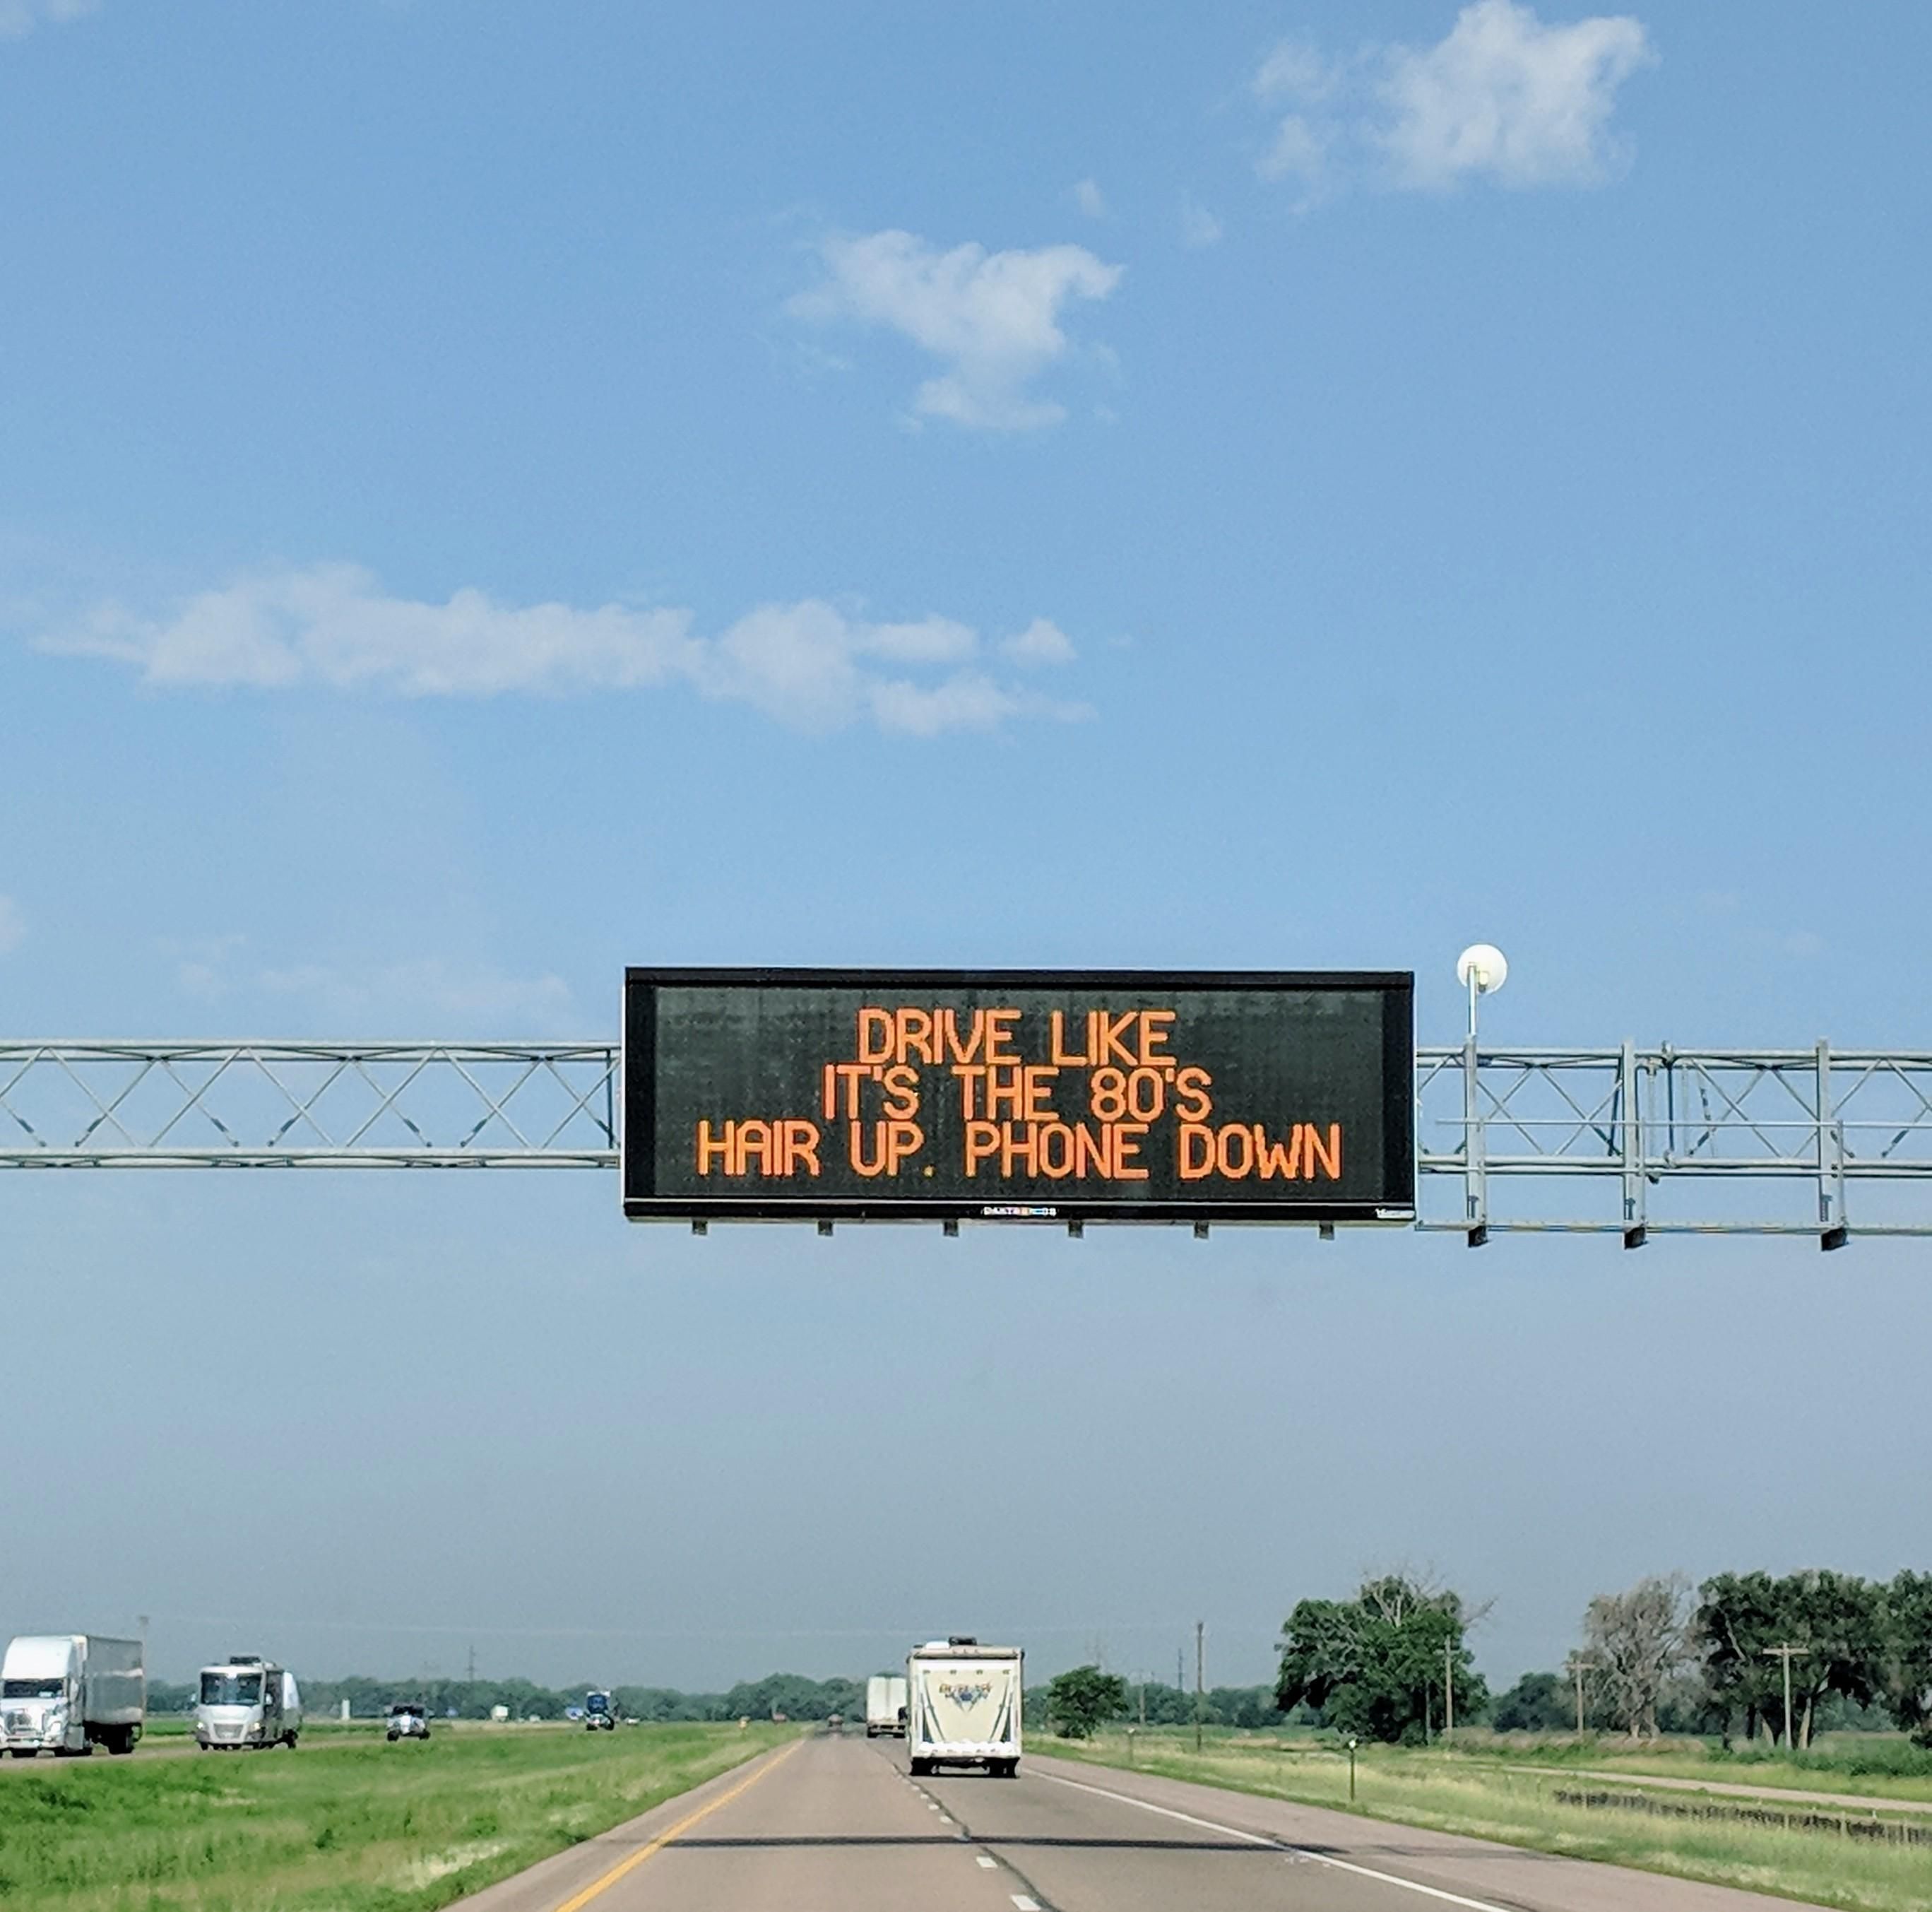 The most entertaining thing we saw while driving through Nebraska.